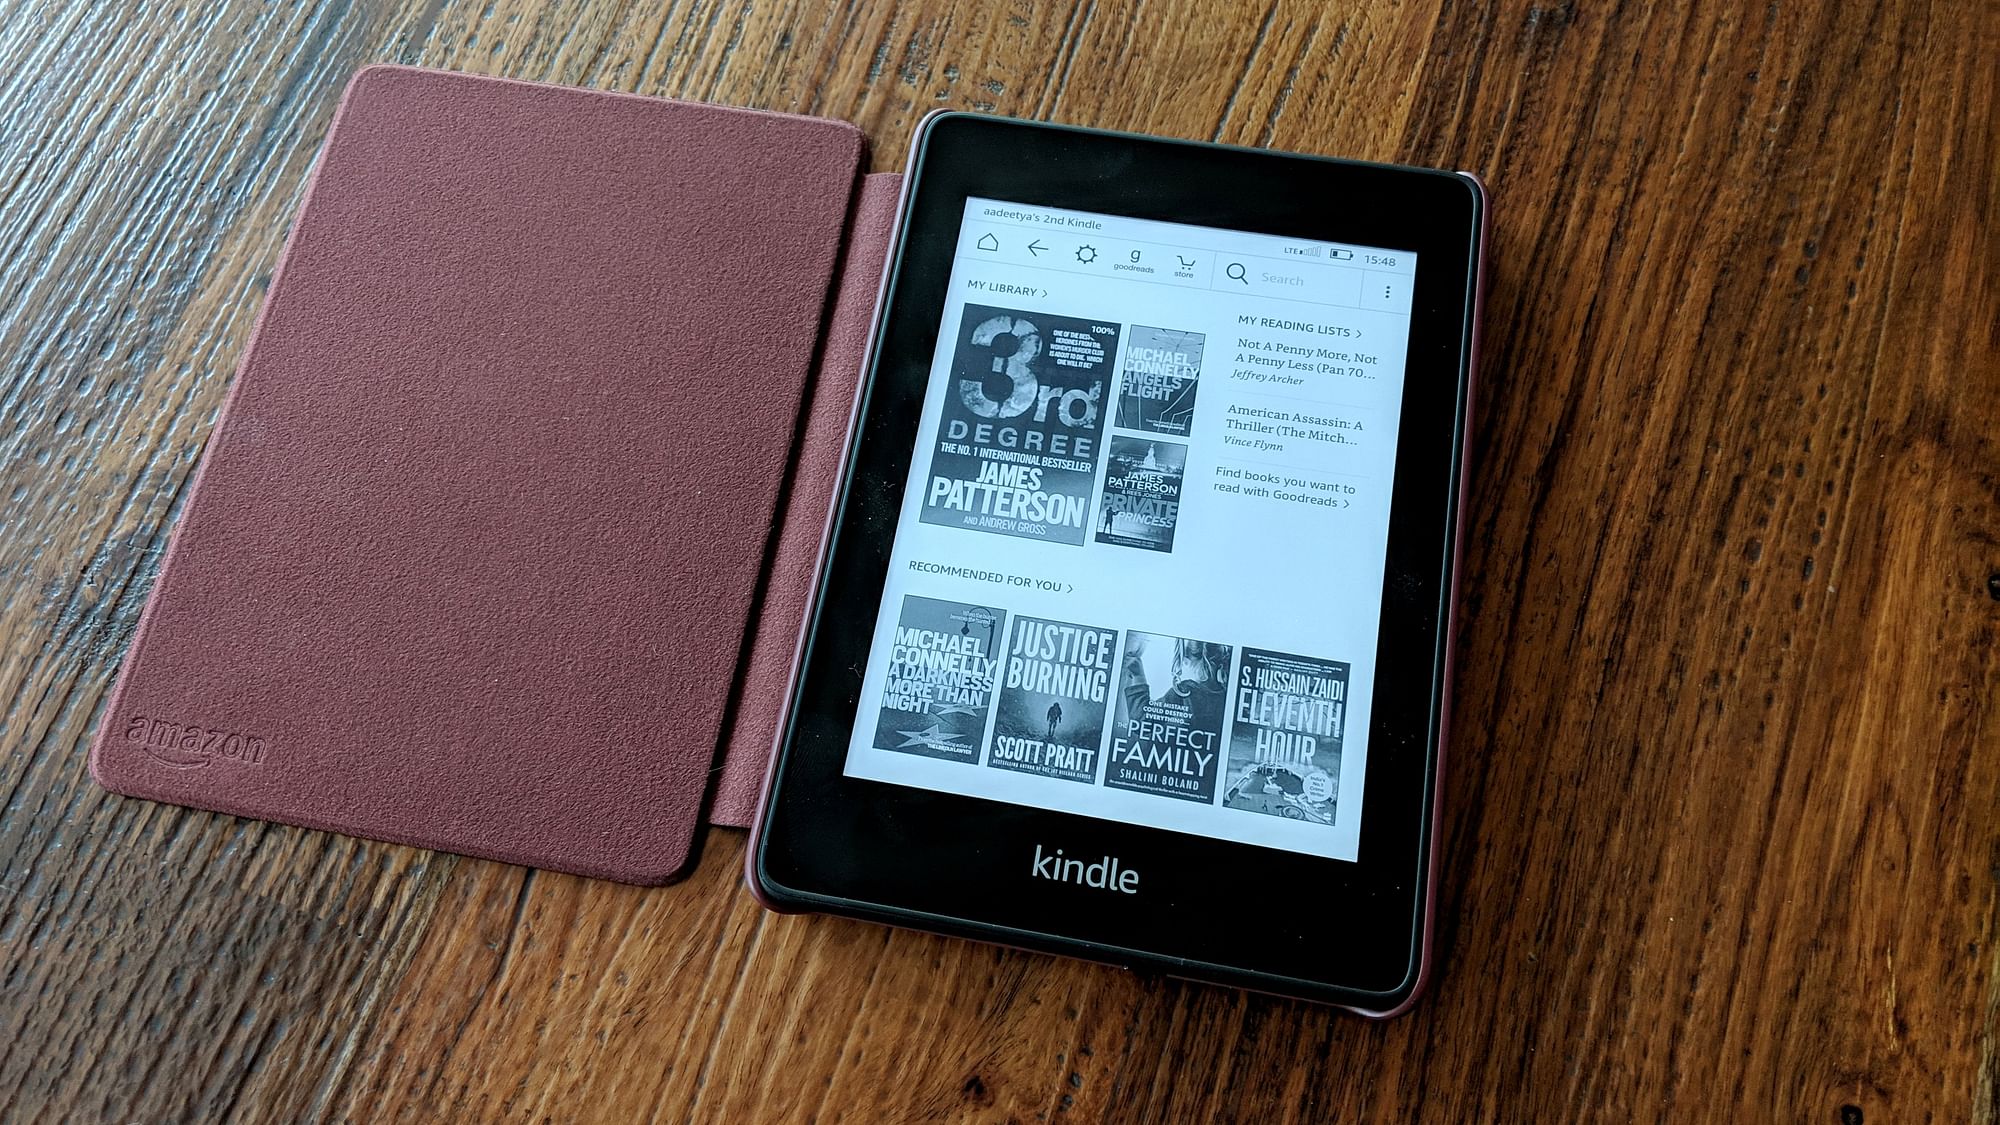 Amazon Kindle Paperwhite 4G vs 2017 3G Model A Look at What’s New